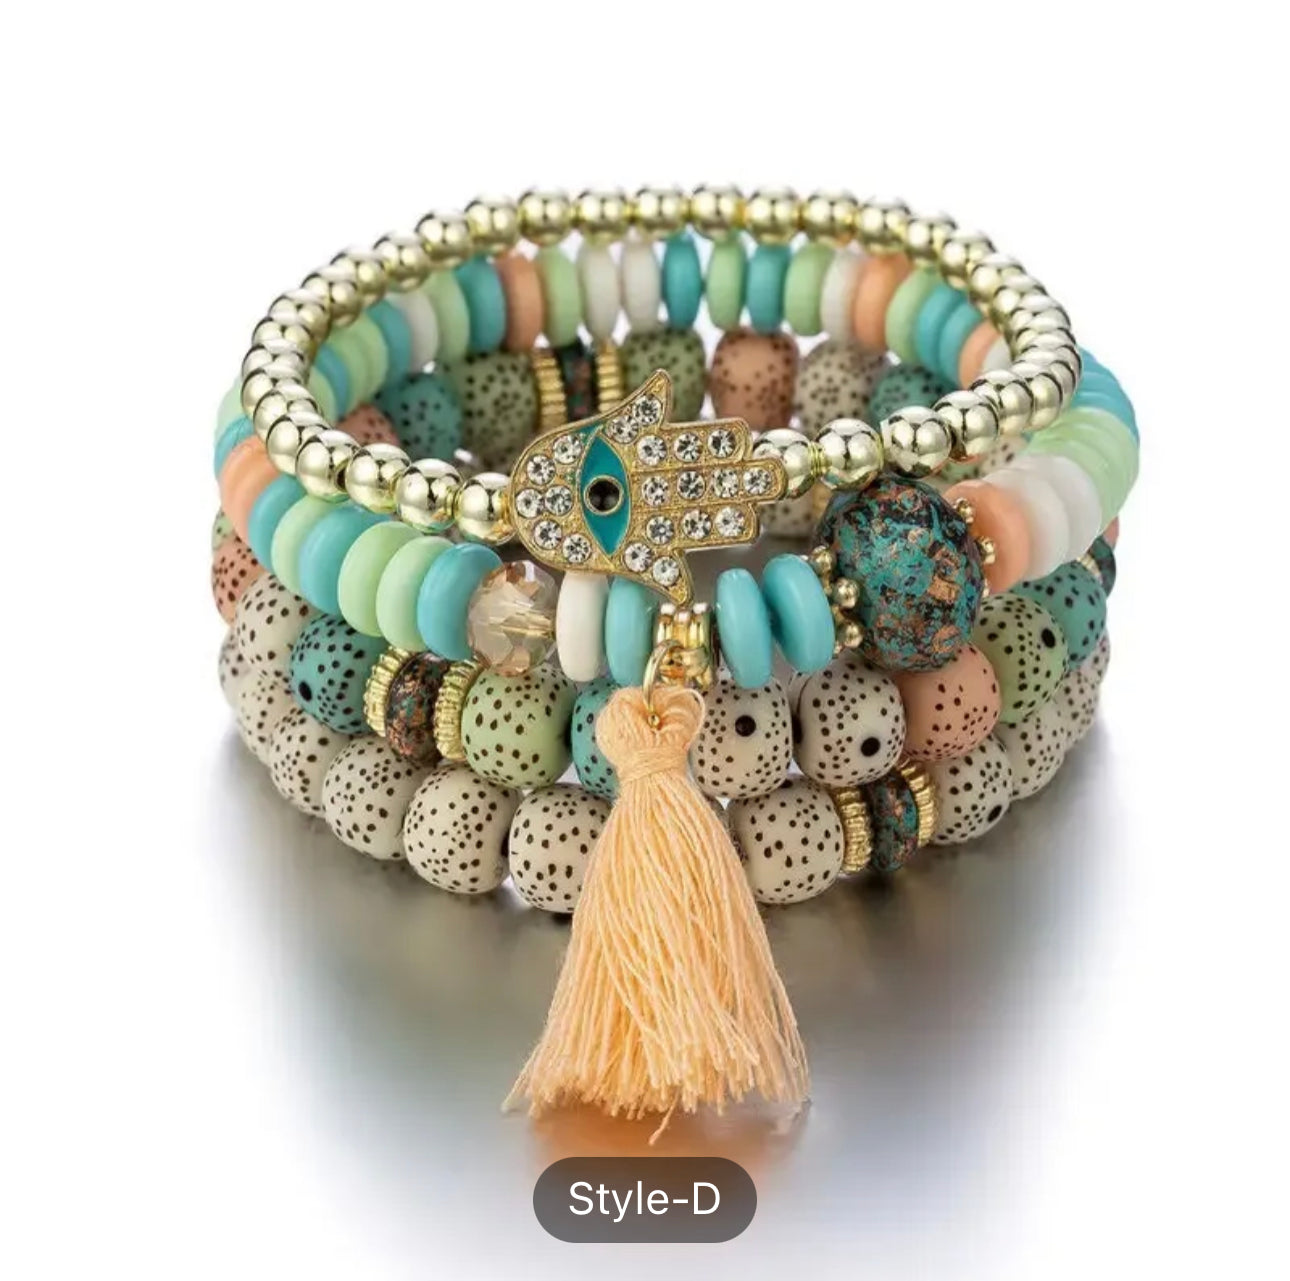 Gorgeous Tassel Palm Eye Pendant Bracelet - A Perfect Addition to Your Boho Look!